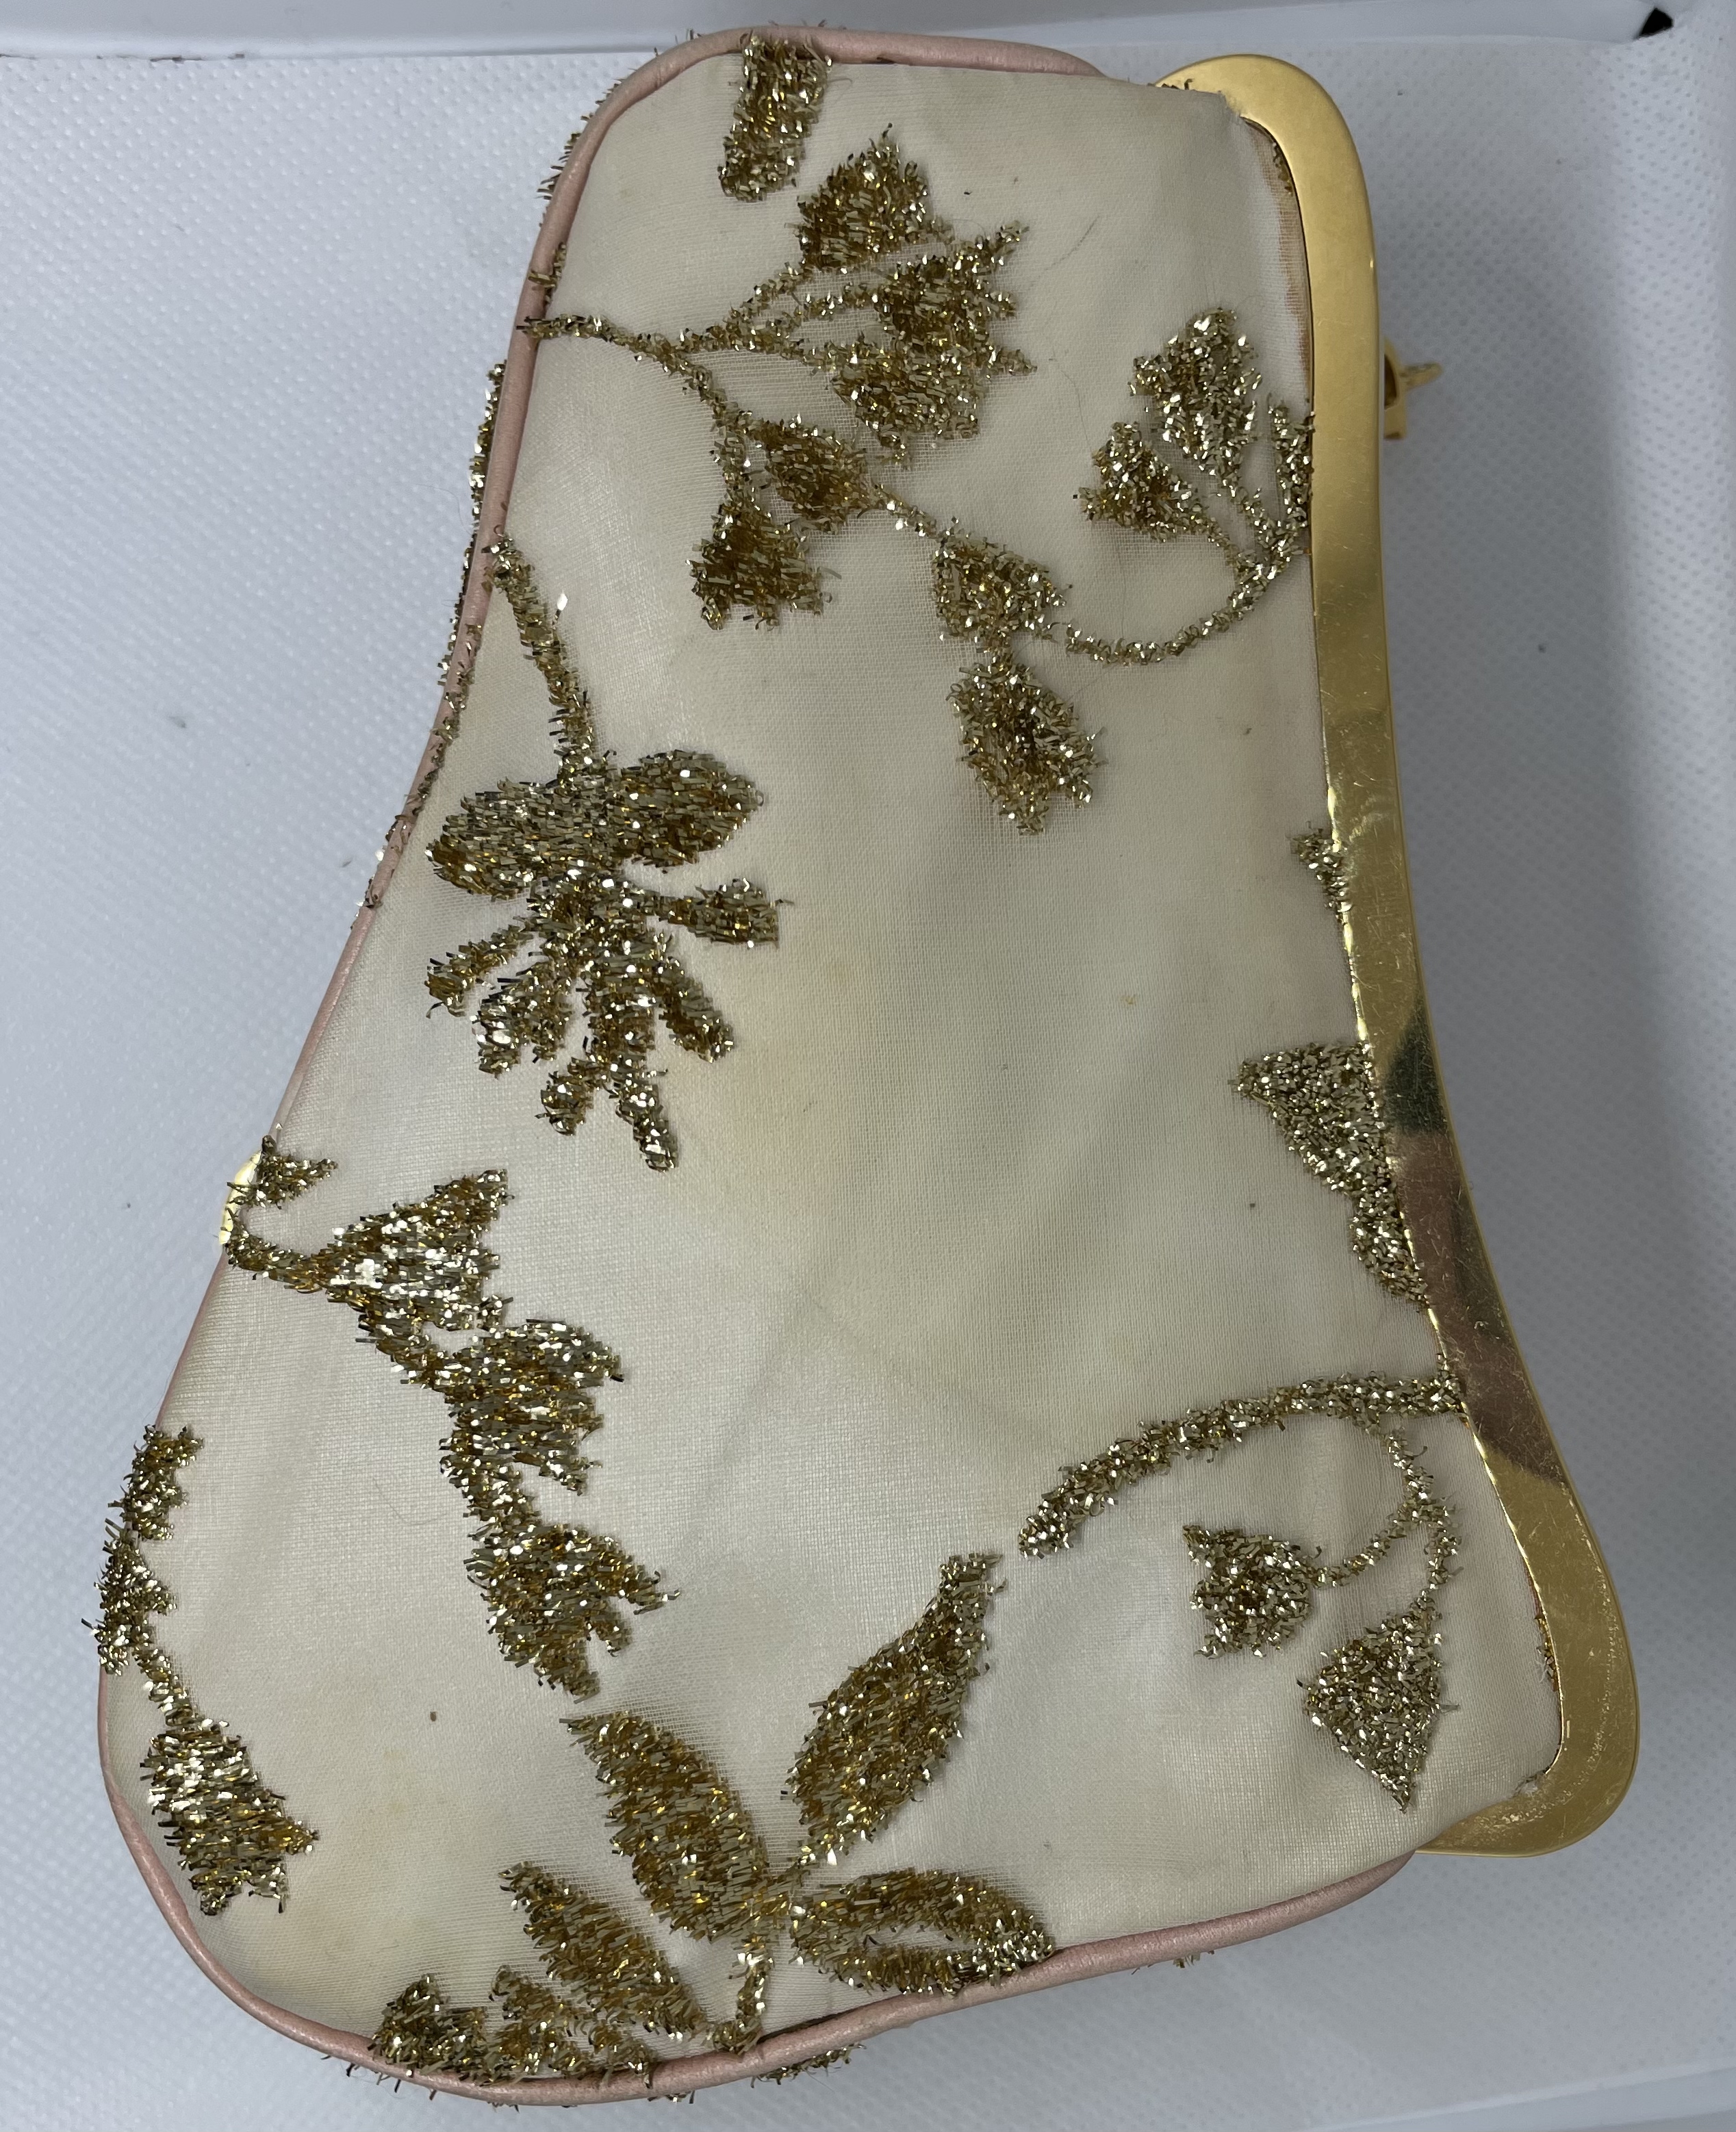 Dior Saddle MiniClutch Limited edition in gold coloured embroidery over cream satin - Image 2 of 14